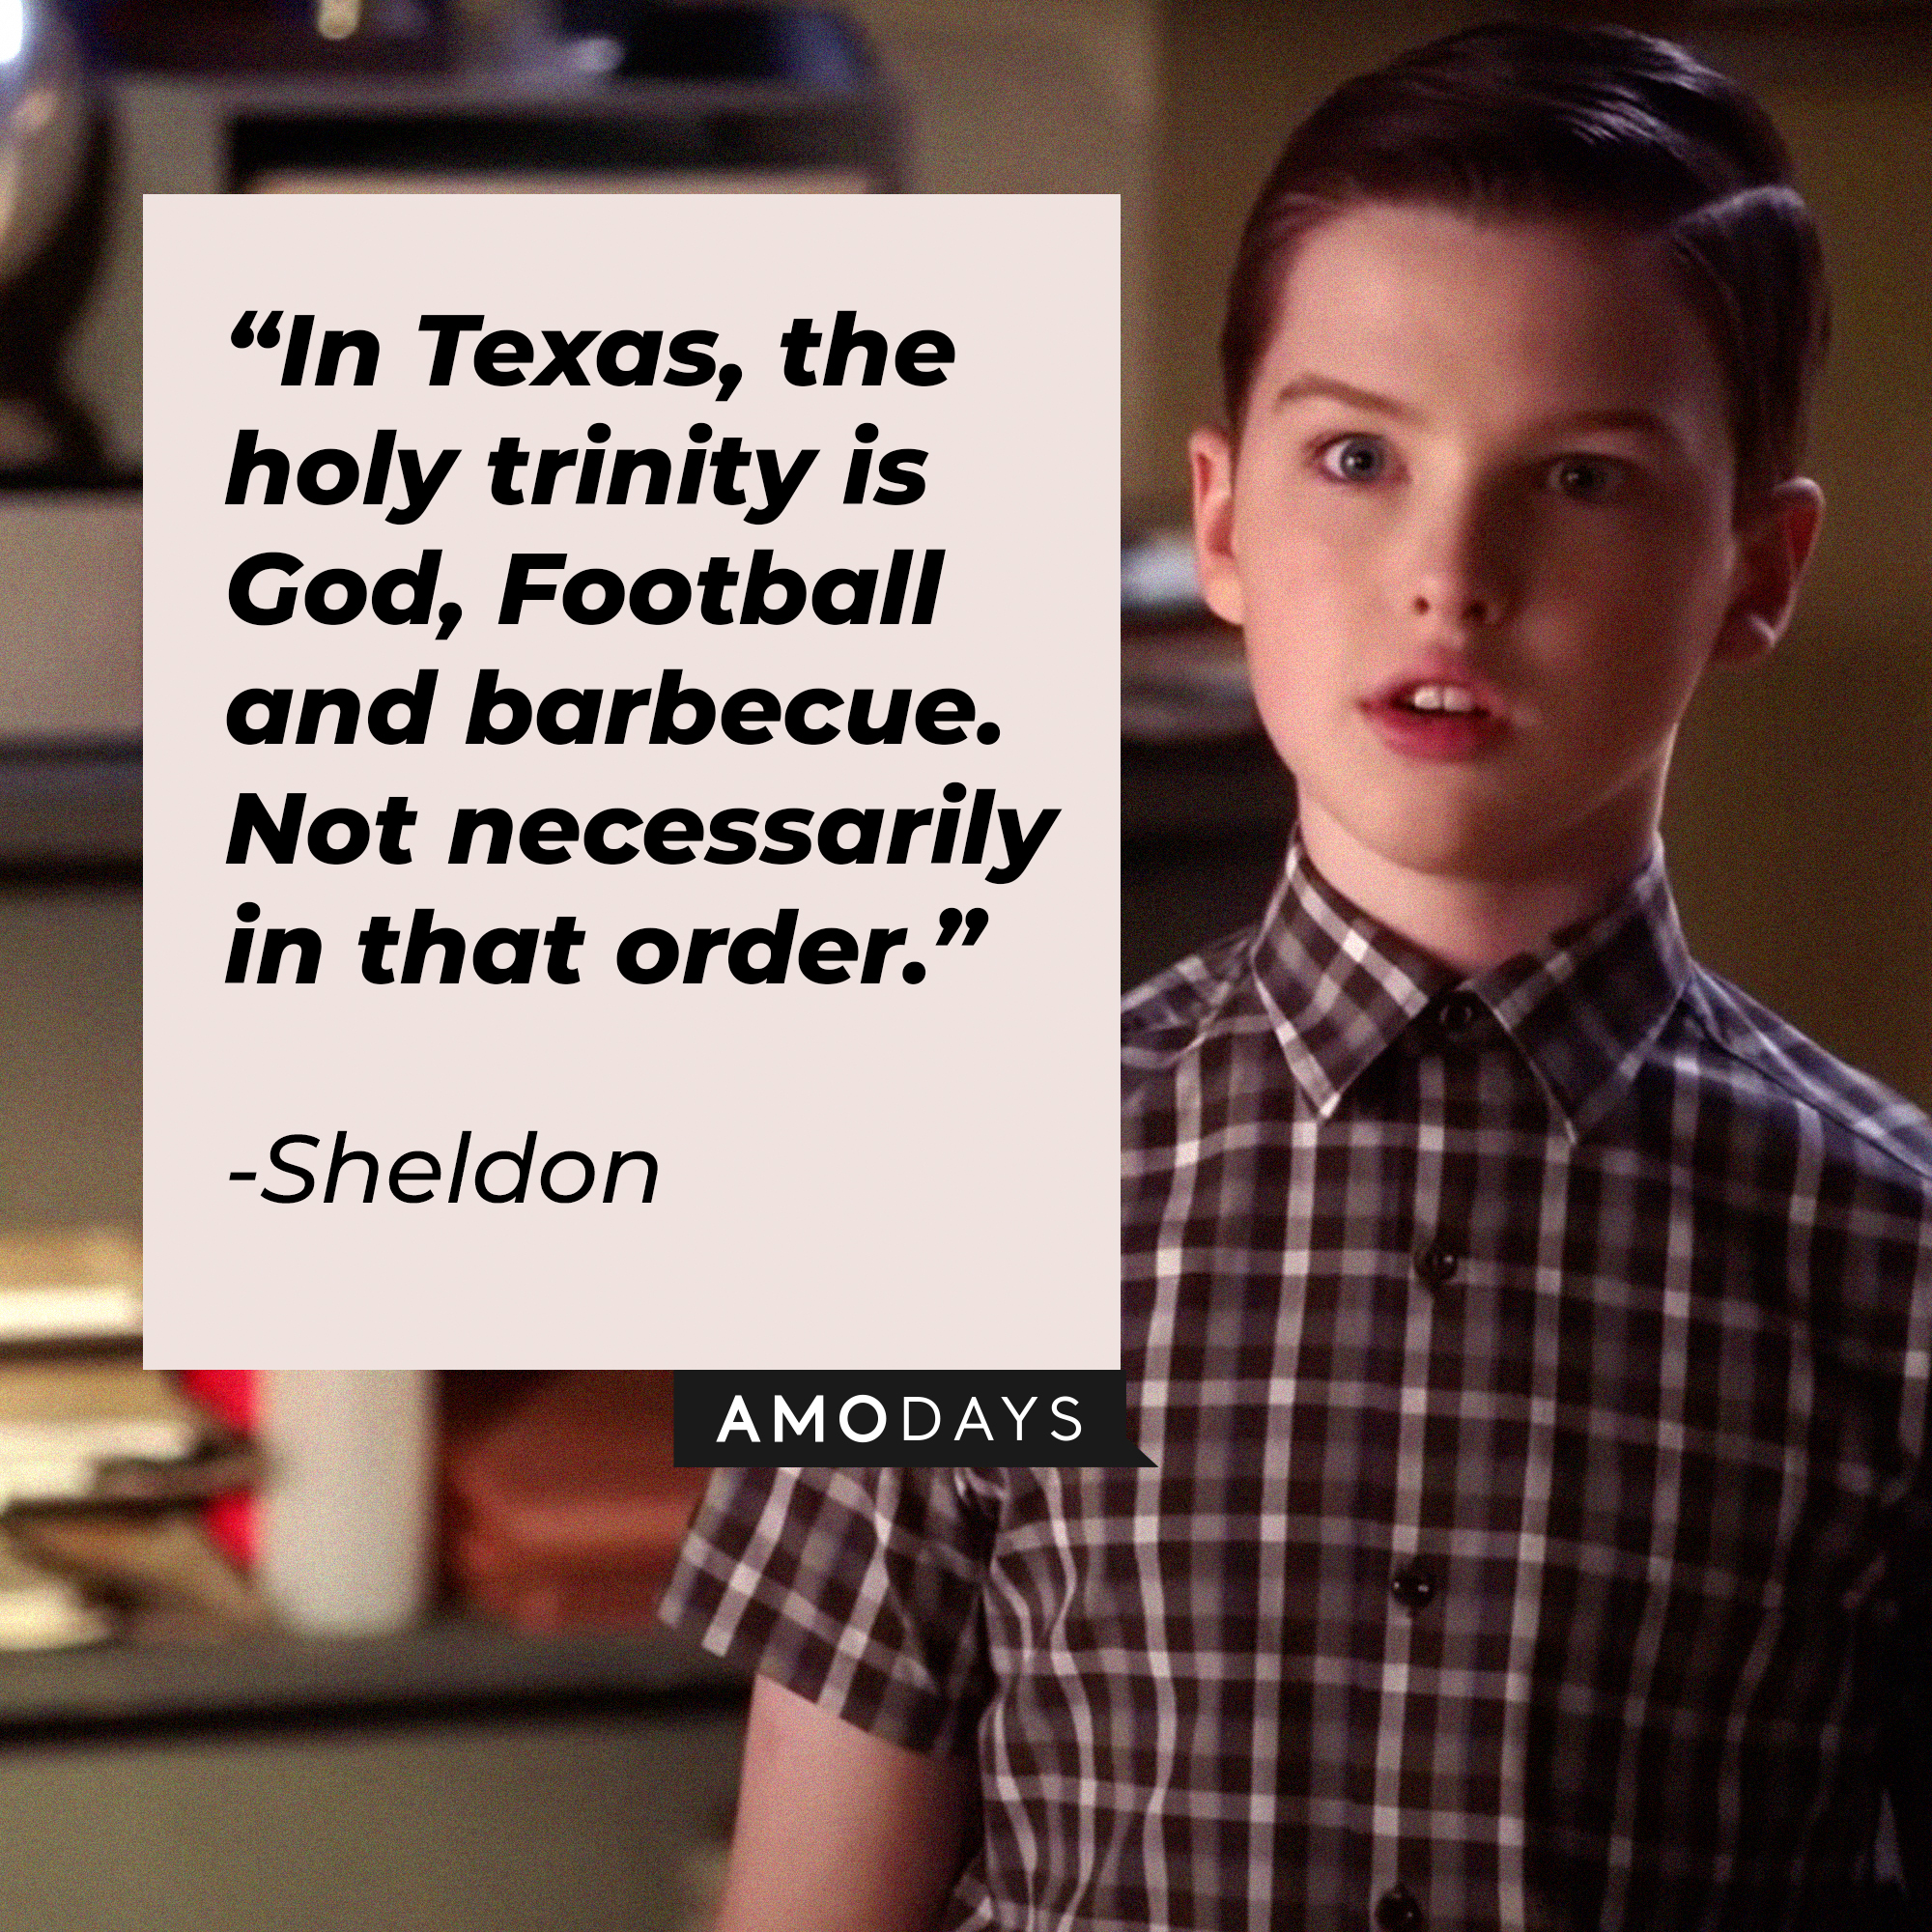 Sheldon's quote: “In Texas, the holy trinity is God, Football and barbecue. Not necessarily in that order.” | Source: facebook.com/YoungSheldonCBS